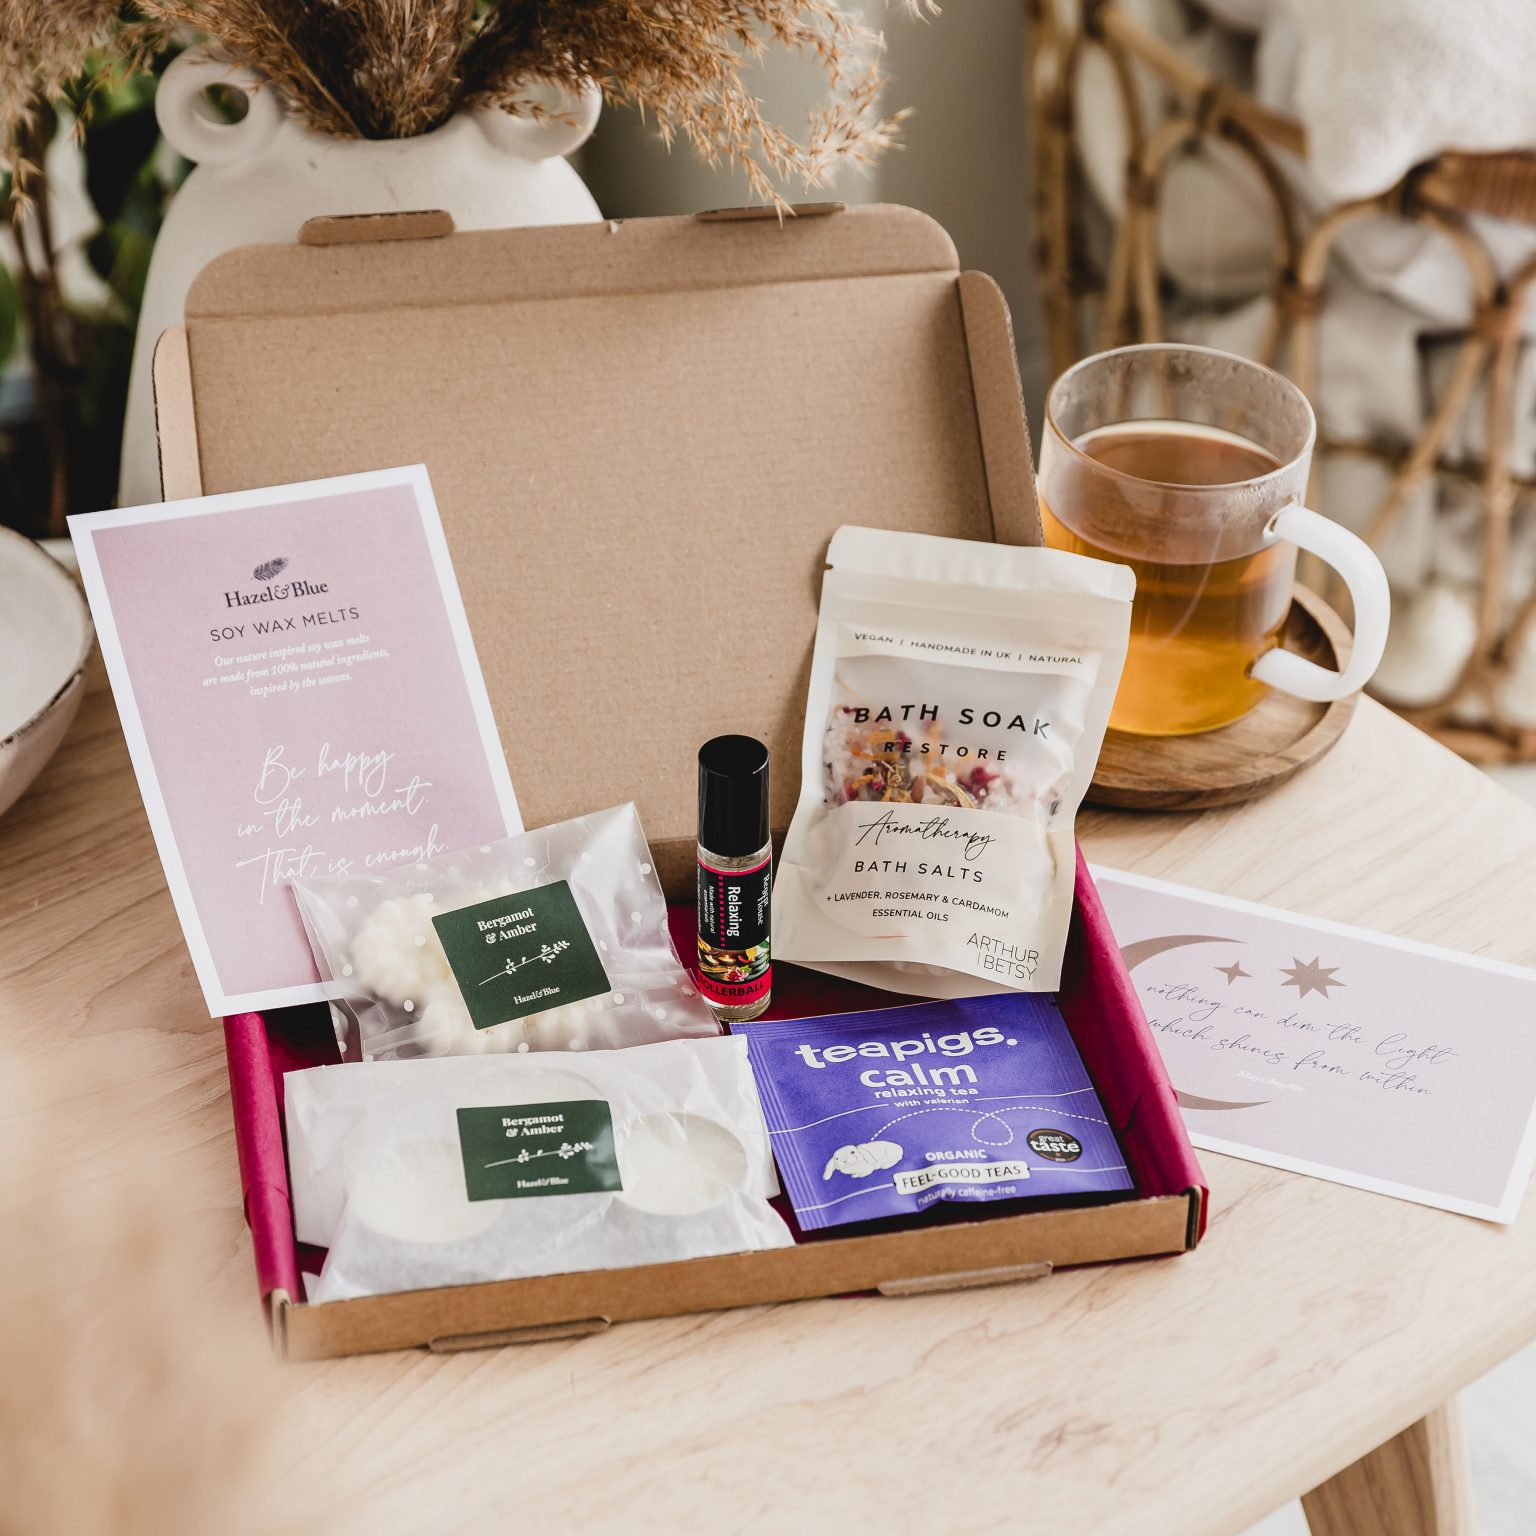 relax and unwind pamper gift box for her eco friendly relaxing pamper gift set thinking of you gift for friend bath spa relaxing gift uk